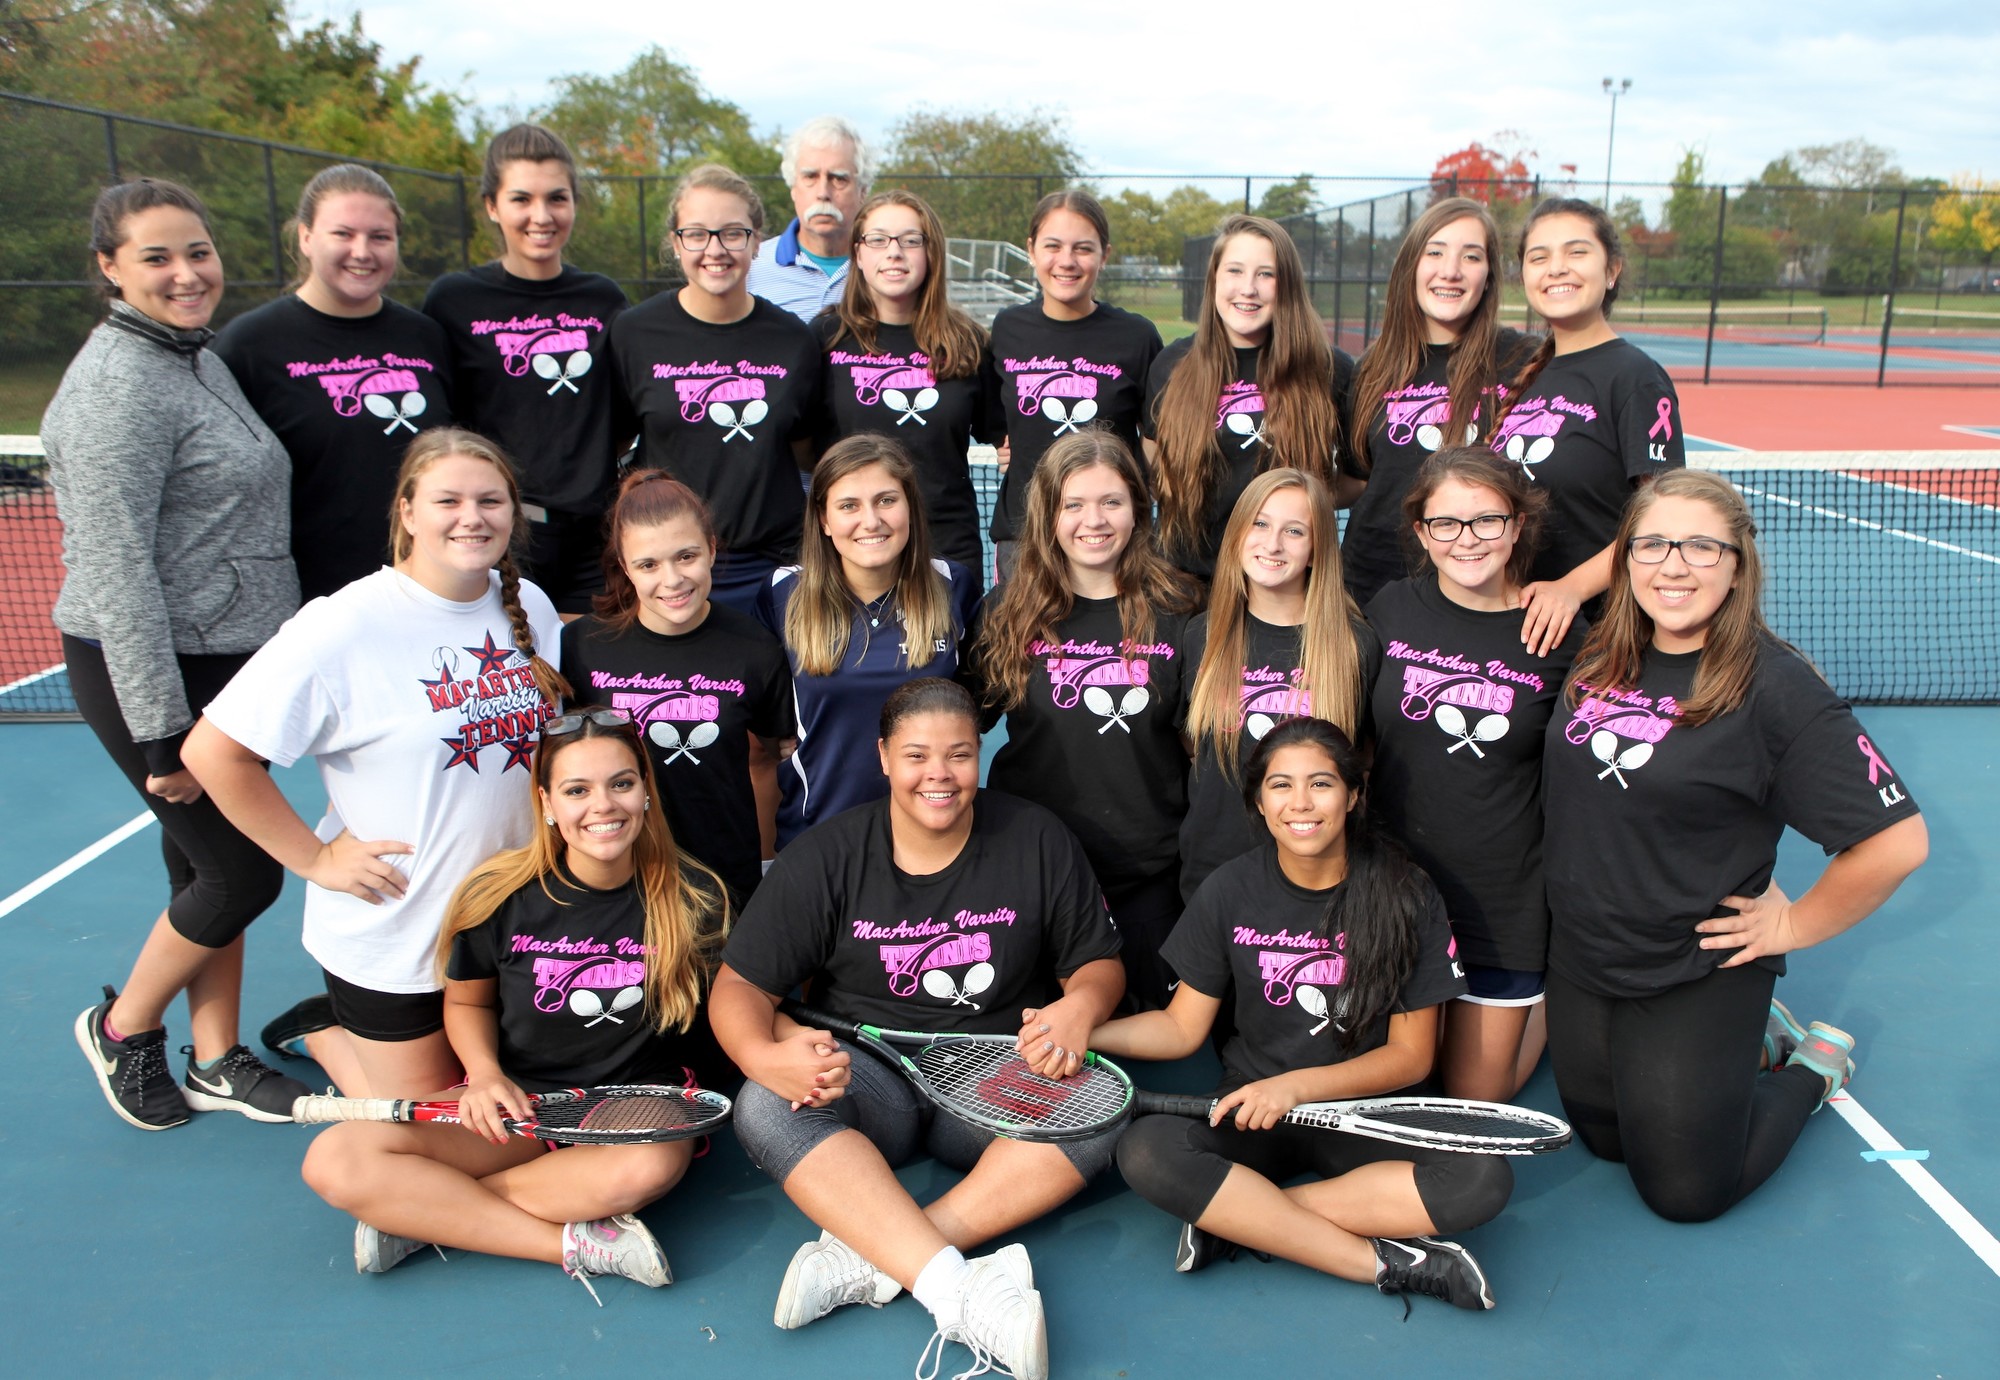 MacArthur High School’s varsity girls’ tennis team finished the spring 2015 season with a record of 13-1 and tied for first place in their conference.